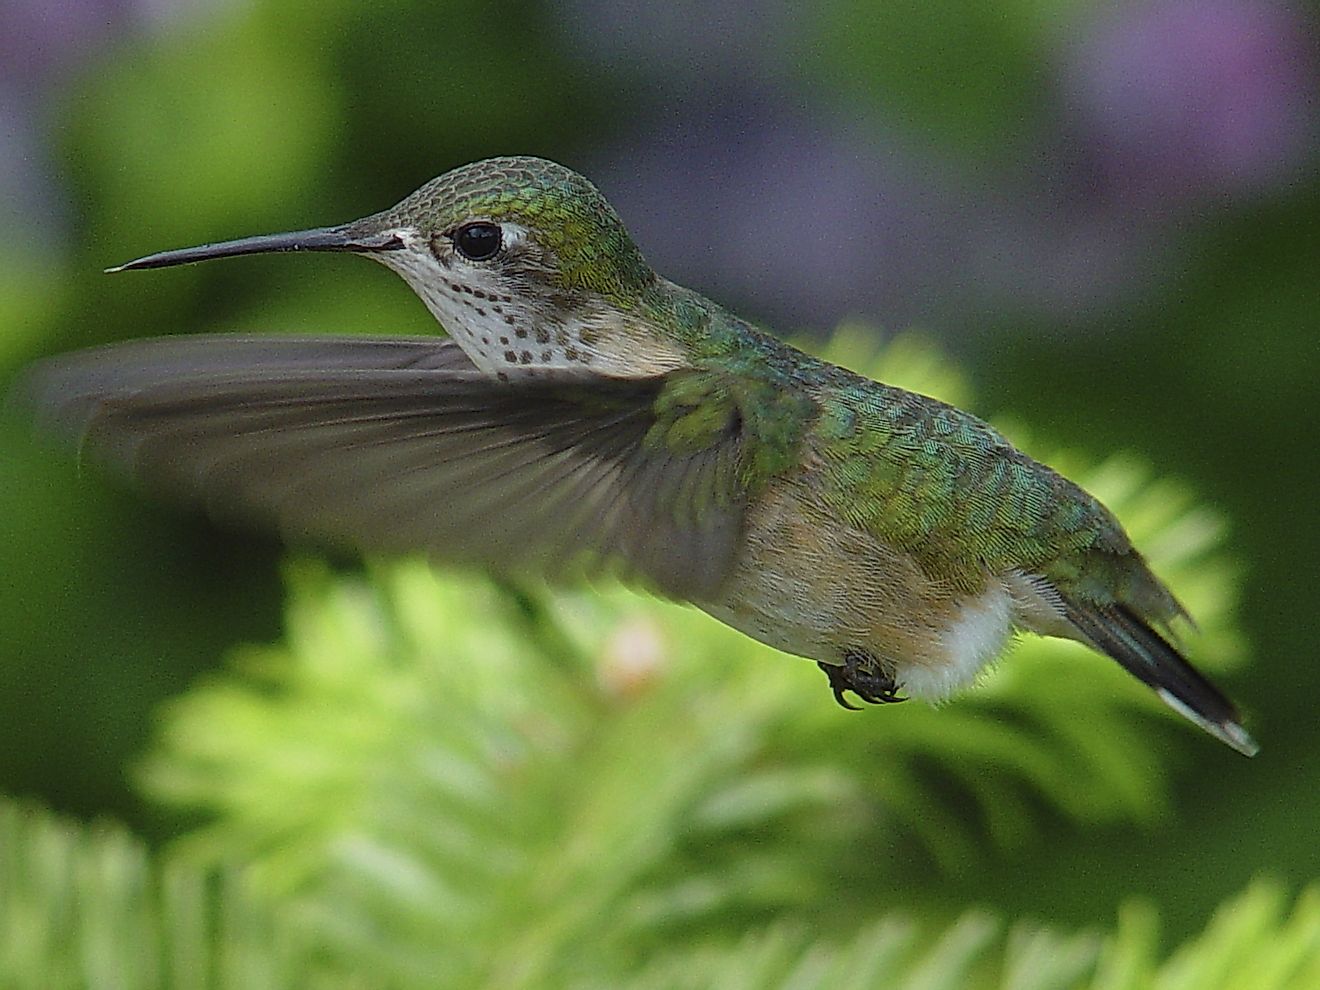 The Calliope Hummingbird was named for one of the most famous muses in Greek mythology. The Genus name, Stellula, means "small star".